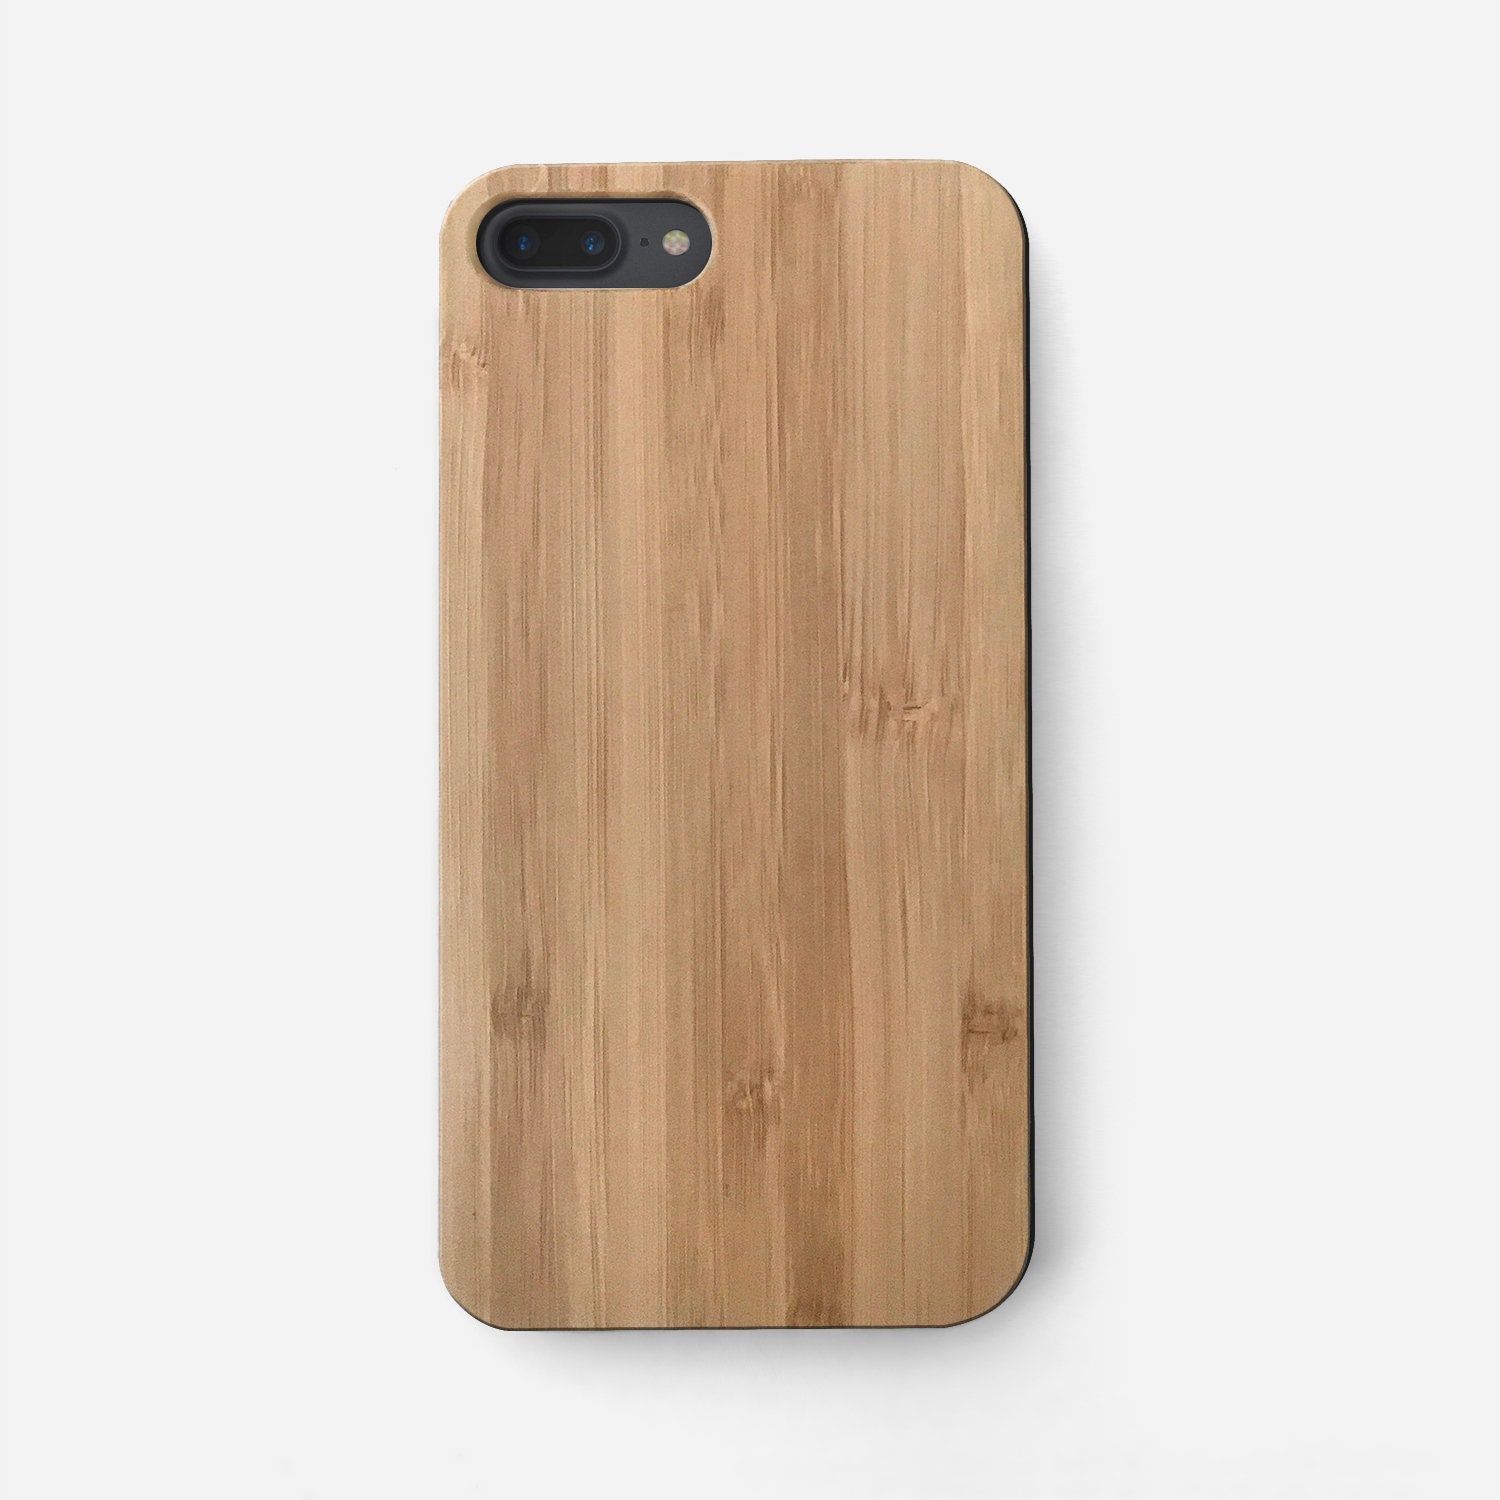 Welsprekend wond shampoo Brand New 100% Wood Bamboo Phone Case Cover for Apple Iphone 6 - Etsy